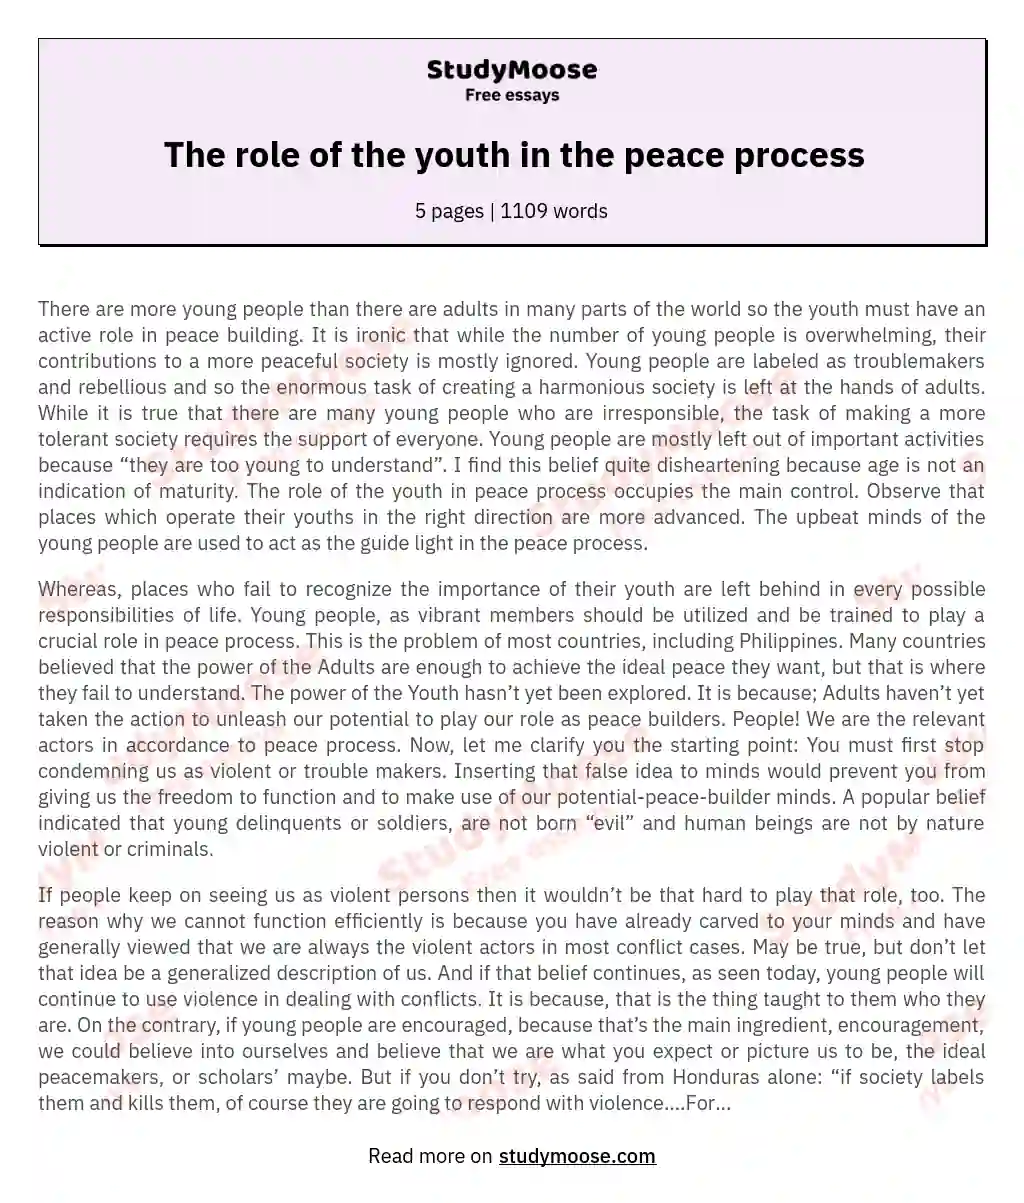 The role of the youth in the peace process essay